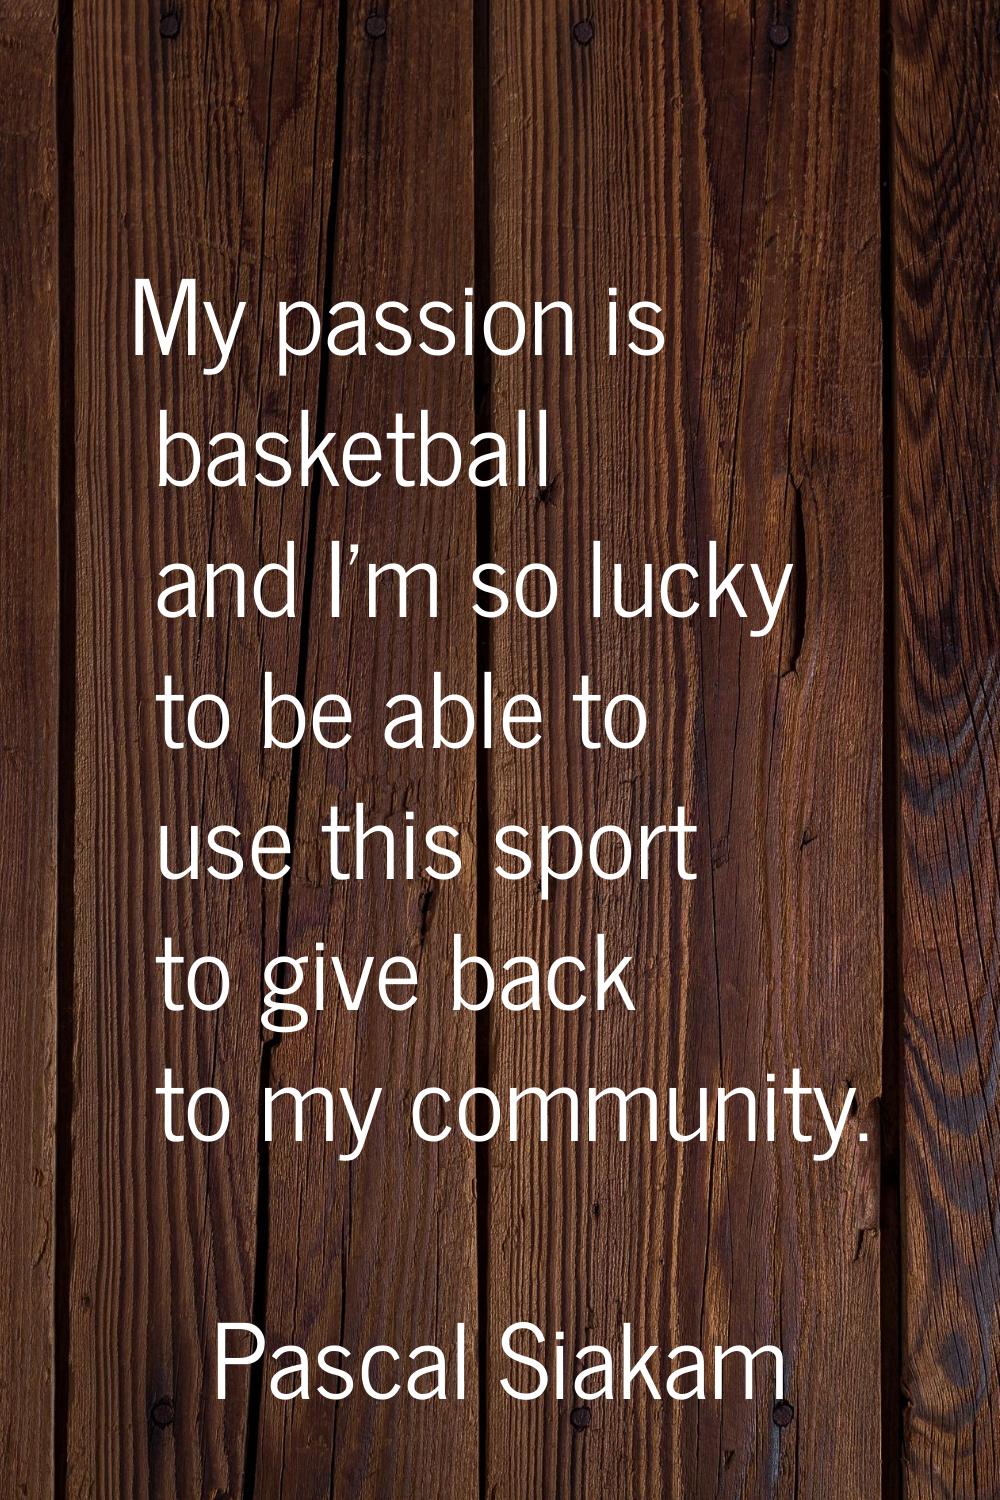 My passion is basketball and I'm so lucky to be able to use this sport to give back to my community